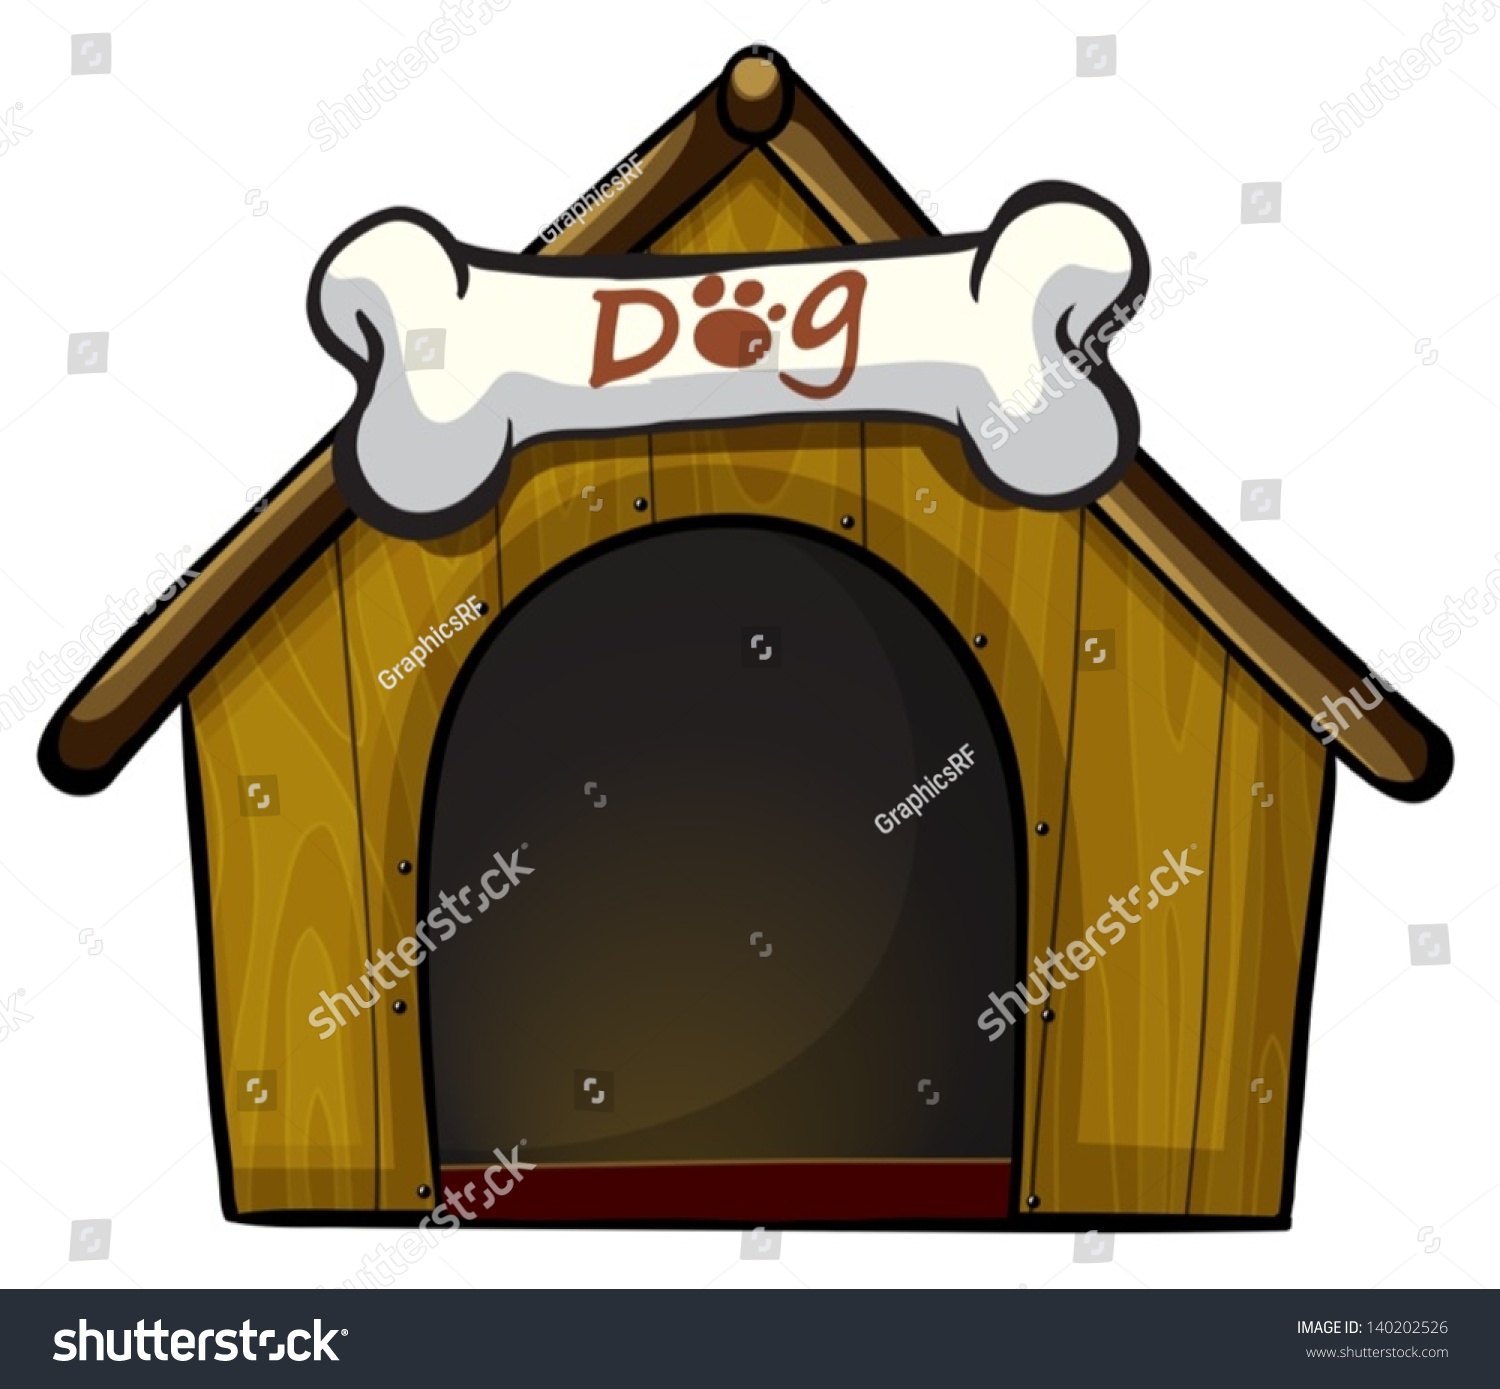 dog kennel clipart - photo #49